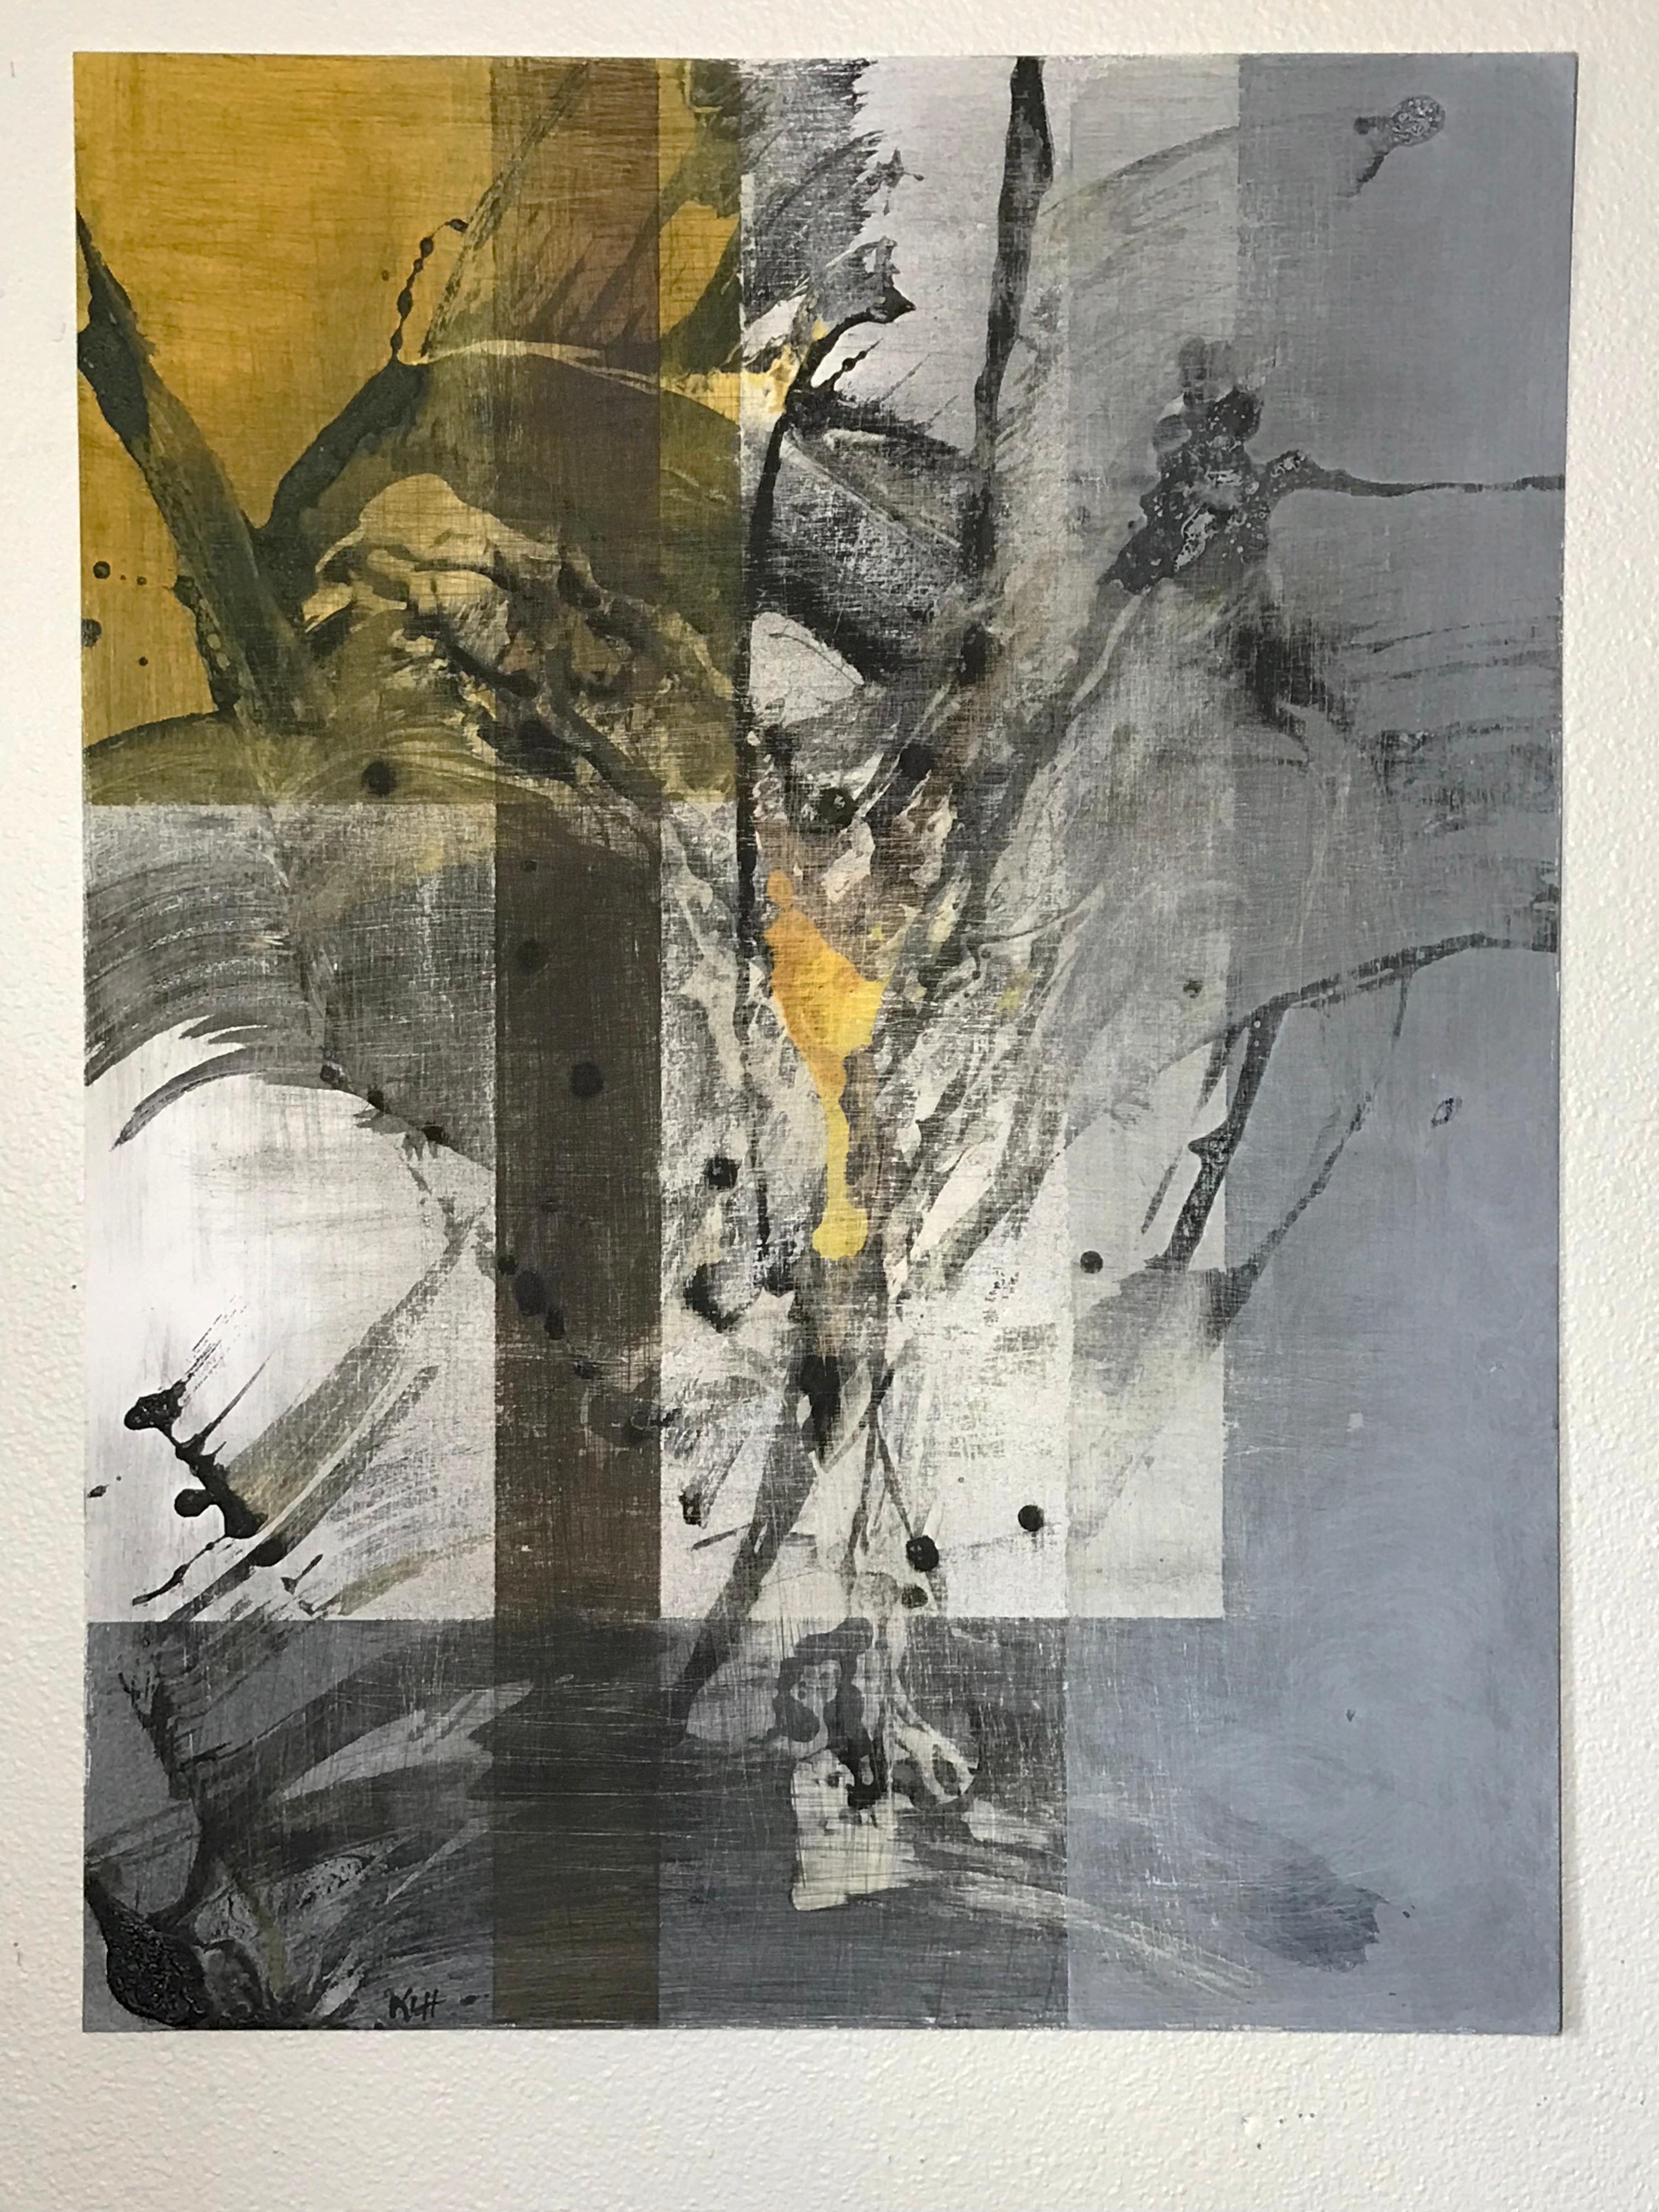 <p>Artist Comments<br>Heavy gestural strokes in black emerge between blocks of yellow, beige, and grey in this expressive abstract by artist Kris Haas. Splashes and drippings emulate crashing waves on windy shores. Part of Kris' derivative and